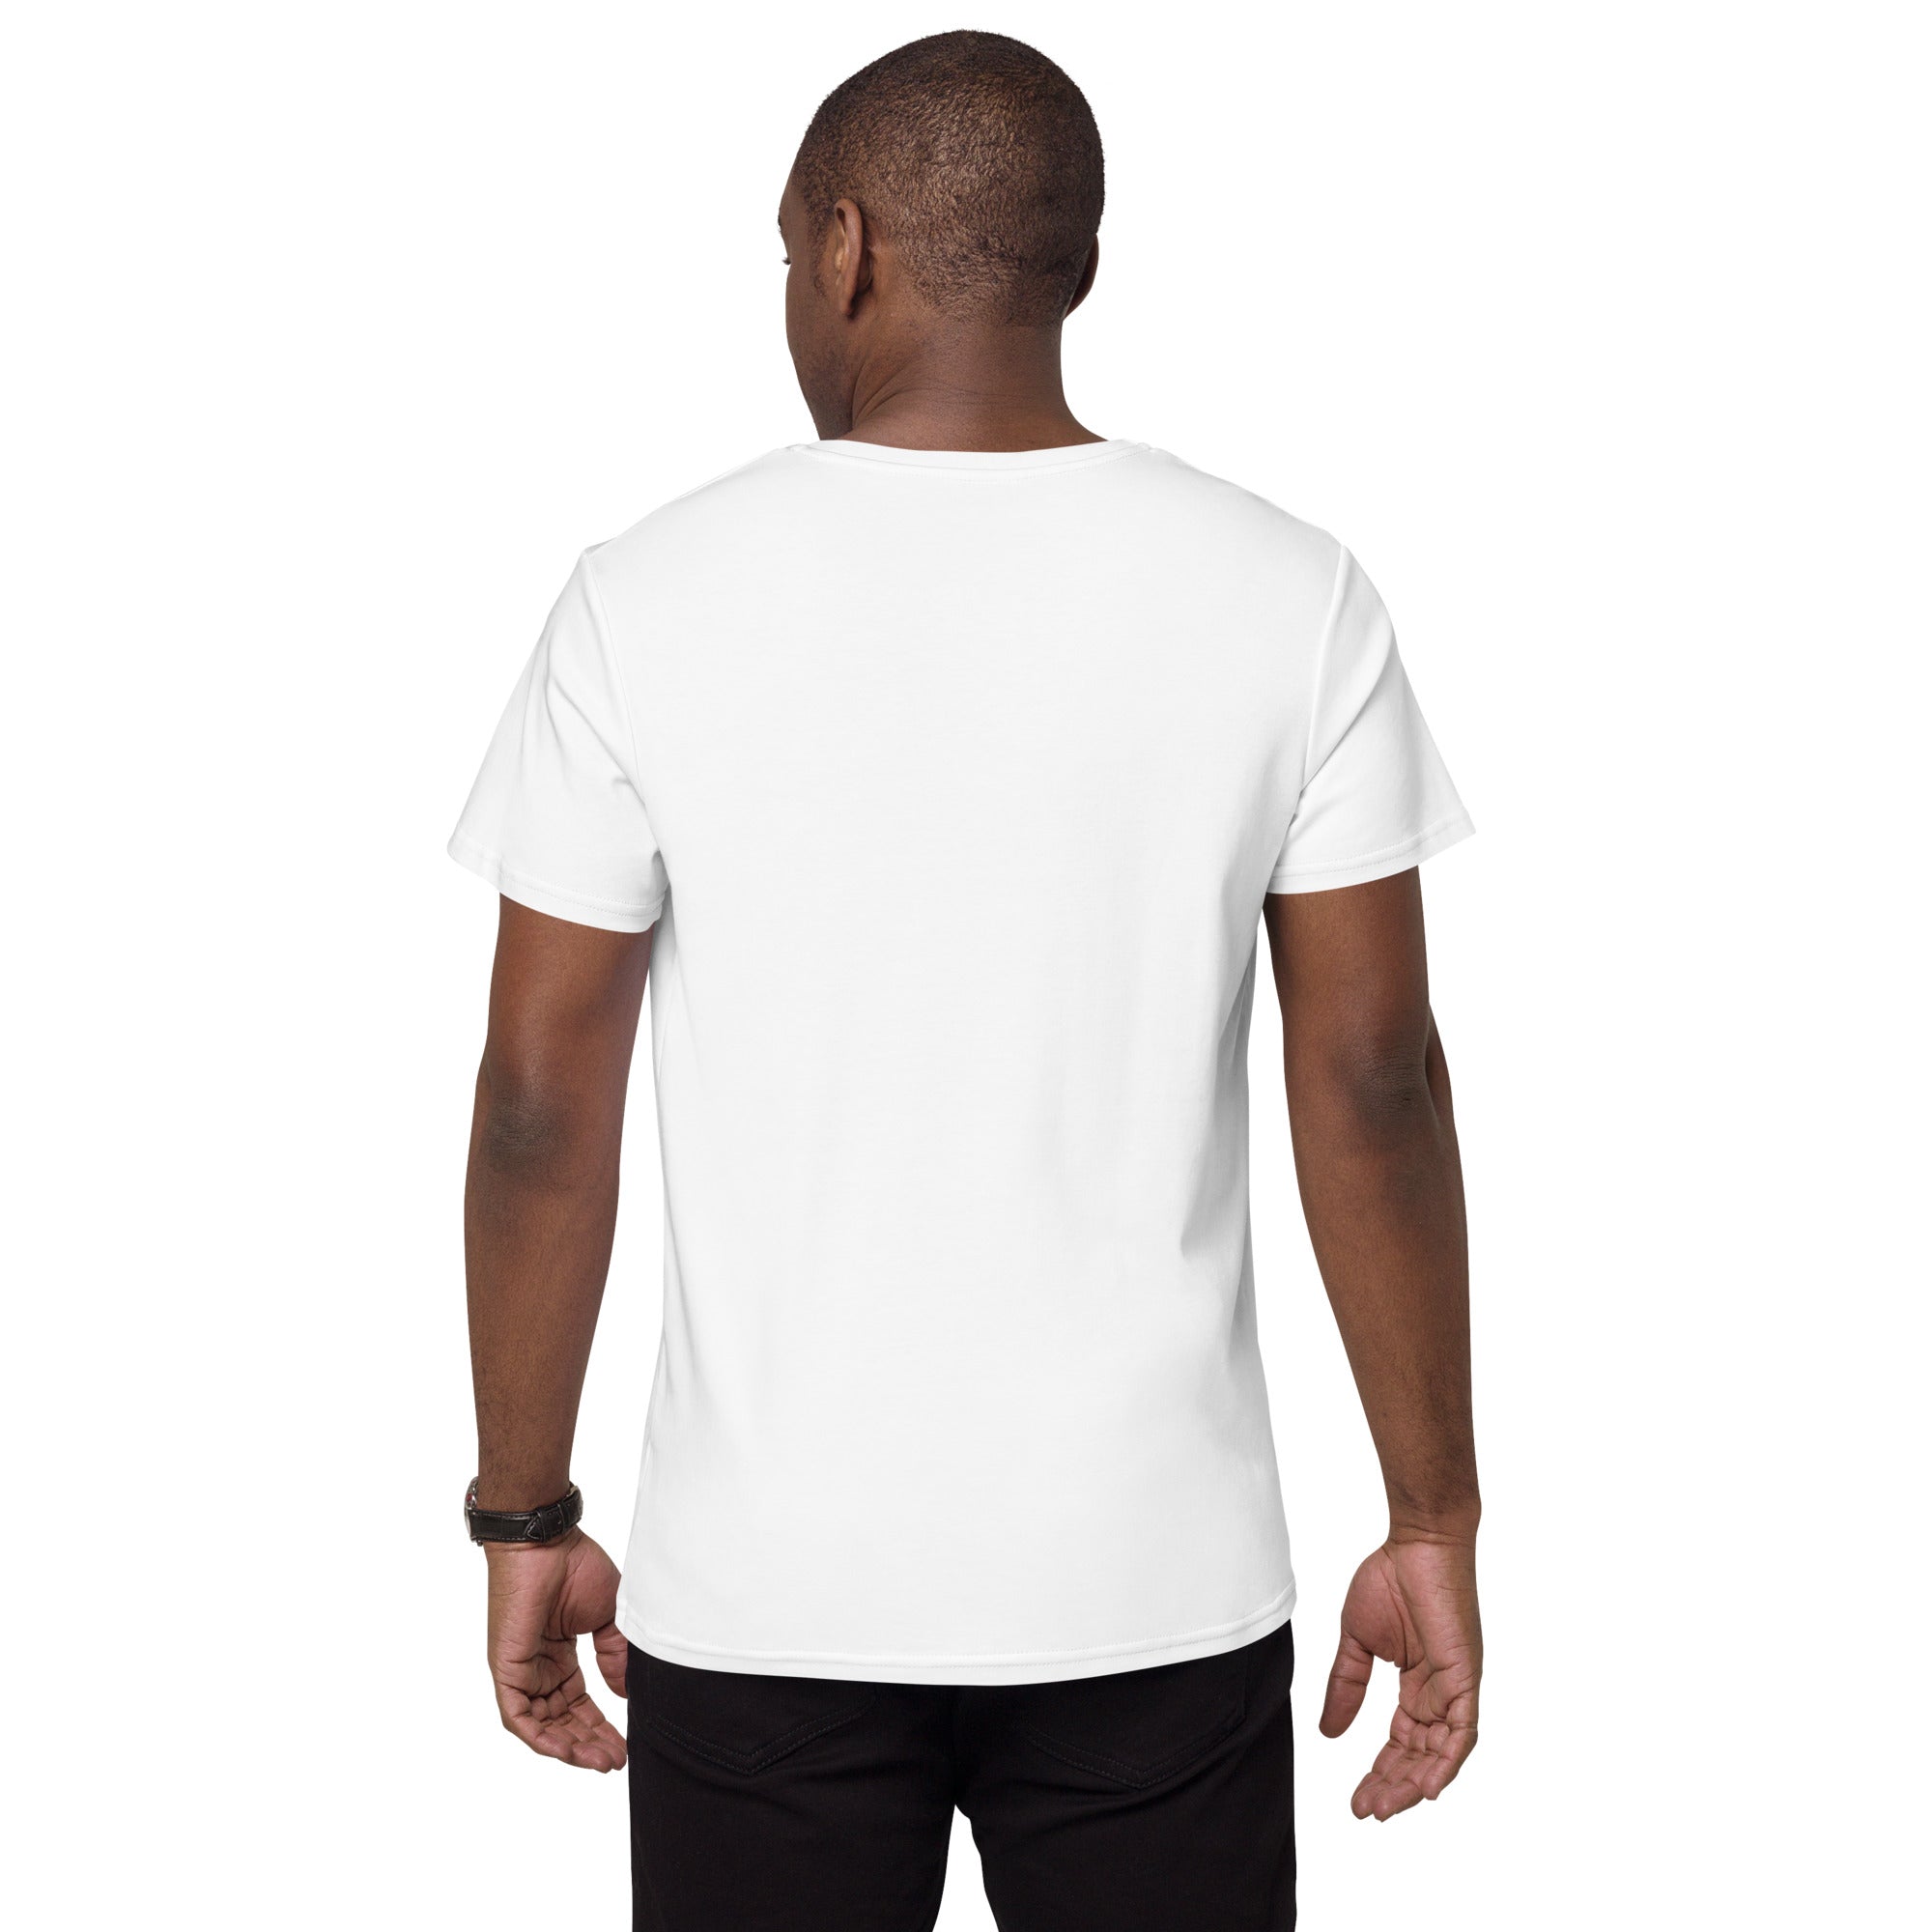 Anacotte Men's Premium Cotton T-Shirt - Ultimate Comfort and Style